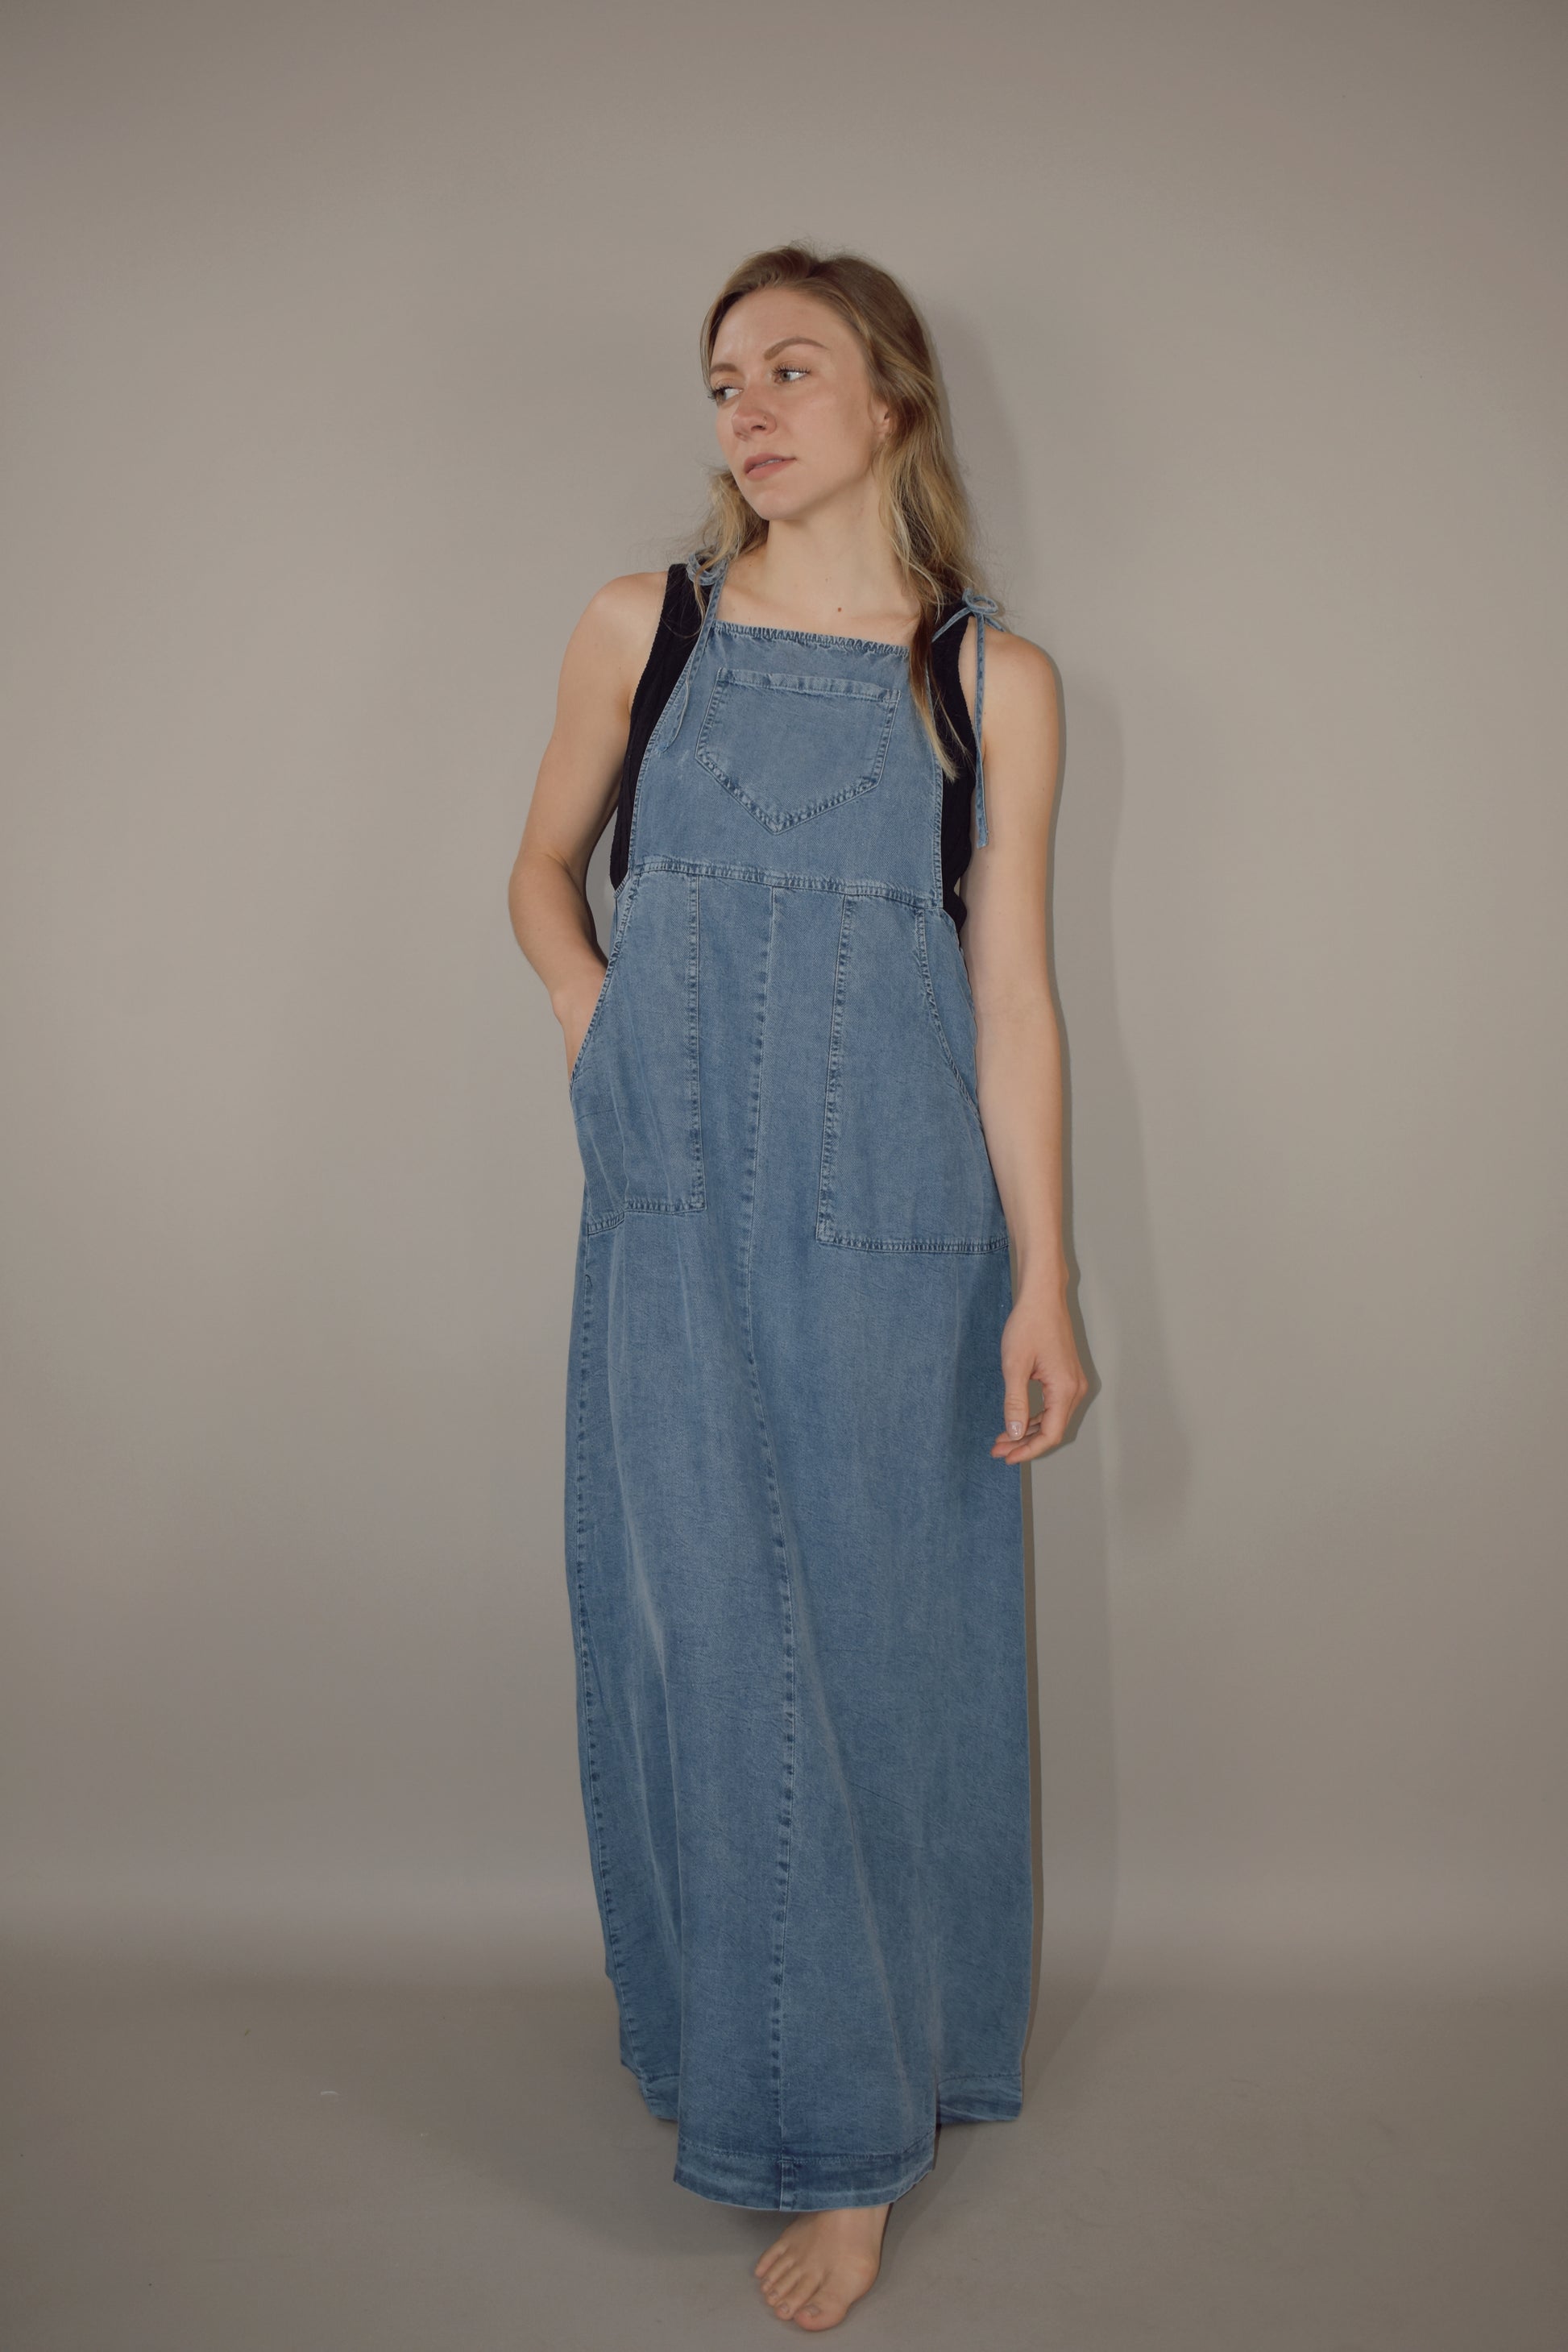 soft and lightweight overall maxi dress with front pocket on bodice and two long patch pockets on skirt. thin spaghetti tie straps. medium wash denim color. flowy.